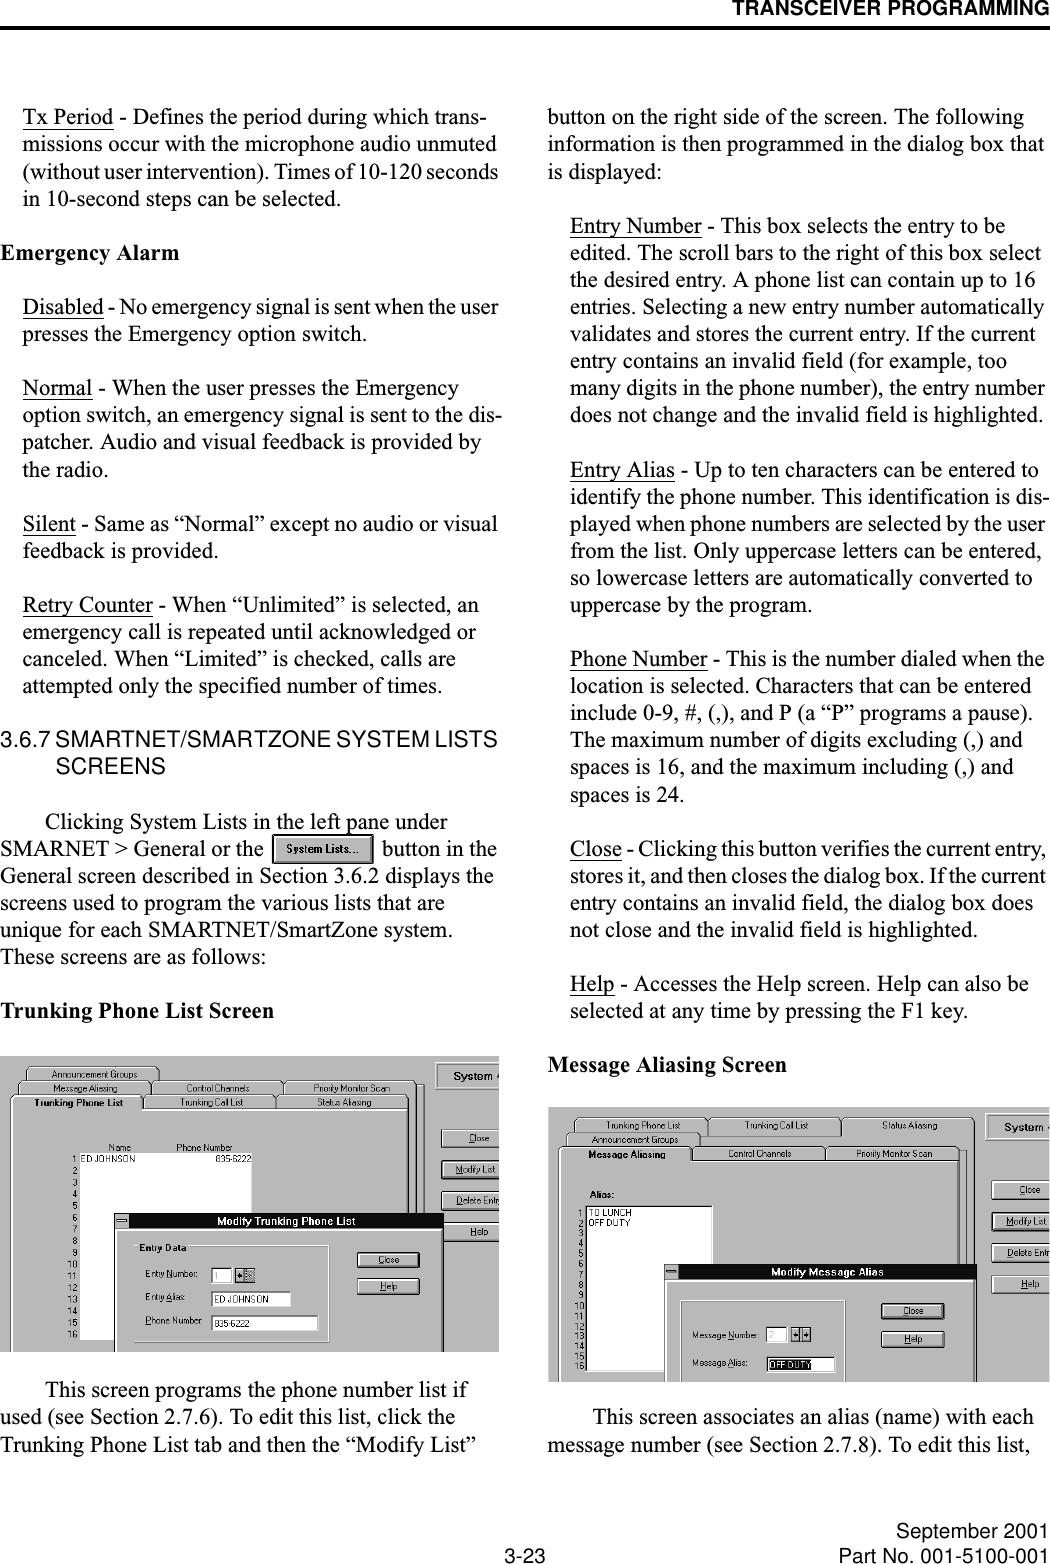 TRANSCEIVER PROGRAMMING3-23 September 2001Part No. 001-5100-001Tx Period - Defines the period during which trans-missions occur with the microphone audio unmuted (without user intervention). Times of 10-120 seconds in 10-second steps can be selected.Emergency AlarmDisabled - No emergency signal is sent when the user presses the Emergency option switch.Normal - When the user presses the Emergency option switch, an emergency signal is sent to the dis-patcher. Audio and visual feedback is provided by the radio.Silent - Same as “Normal” except no audio or visual feedback is provided.Retry Counter - When “Unlimited” is selected, an emergency call is repeated until acknowledged or canceled. When “Limited” is checked, calls are attempted only the specified number of times.3.6.7 SMARTNET/SMARTZONE SYSTEM LISTS SCREENSClicking System Lists in the left pane under SMARNET &gt; General or the   button in the General screen described in Section 3.6.2 displays the screens used to program the various lists that are unique for each SMARTNET/SmartZone system. These screens are as follows:Trunking Phone List ScreenThis screen programs the phone number list if used (see Section 2.7.6). To edit this list, click the Trunking Phone List tab and then the “Modify List” button on the right side of the screen. The following information is then programmed in the dialog box that is displayed:Entry Number - This box selects the entry to be edited. The scroll bars to the right of this box select the desired entry. A phone list can contain up to 16 entries. Selecting a new entry number automatically validates and stores the current entry. If the current entry contains an invalid field (for example, too many digits in the phone number), the entry number does not change and the invalid field is highlighted.Entry Alias - Up to ten characters can be entered to identify the phone number. This identification is dis-played when phone numbers are selected by the user from the list. Only uppercase letters can be entered, so lowercase letters are automatically converted to uppercase by the program.Phone Number - This is the number dialed when the location is selected. Characters that can be entered include 0-9, #, (,), and P (a “P” programs a pause). The maximum number of digits excluding (,) and spaces is 16, and the maximum including (,) and spaces is 24.Close - Clicking this button verifies the current entry, stores it, and then closes the dialog box. If the current entry contains an invalid field, the dialog box does not close and the invalid field is highlighted.Help - Accesses the Help screen. Help can also be selected at any time by pressing the F1 key.Message Aliasing ScreenThis screen associates an alias (name) with each message number (see Section 2.7.8). To edit this list, 